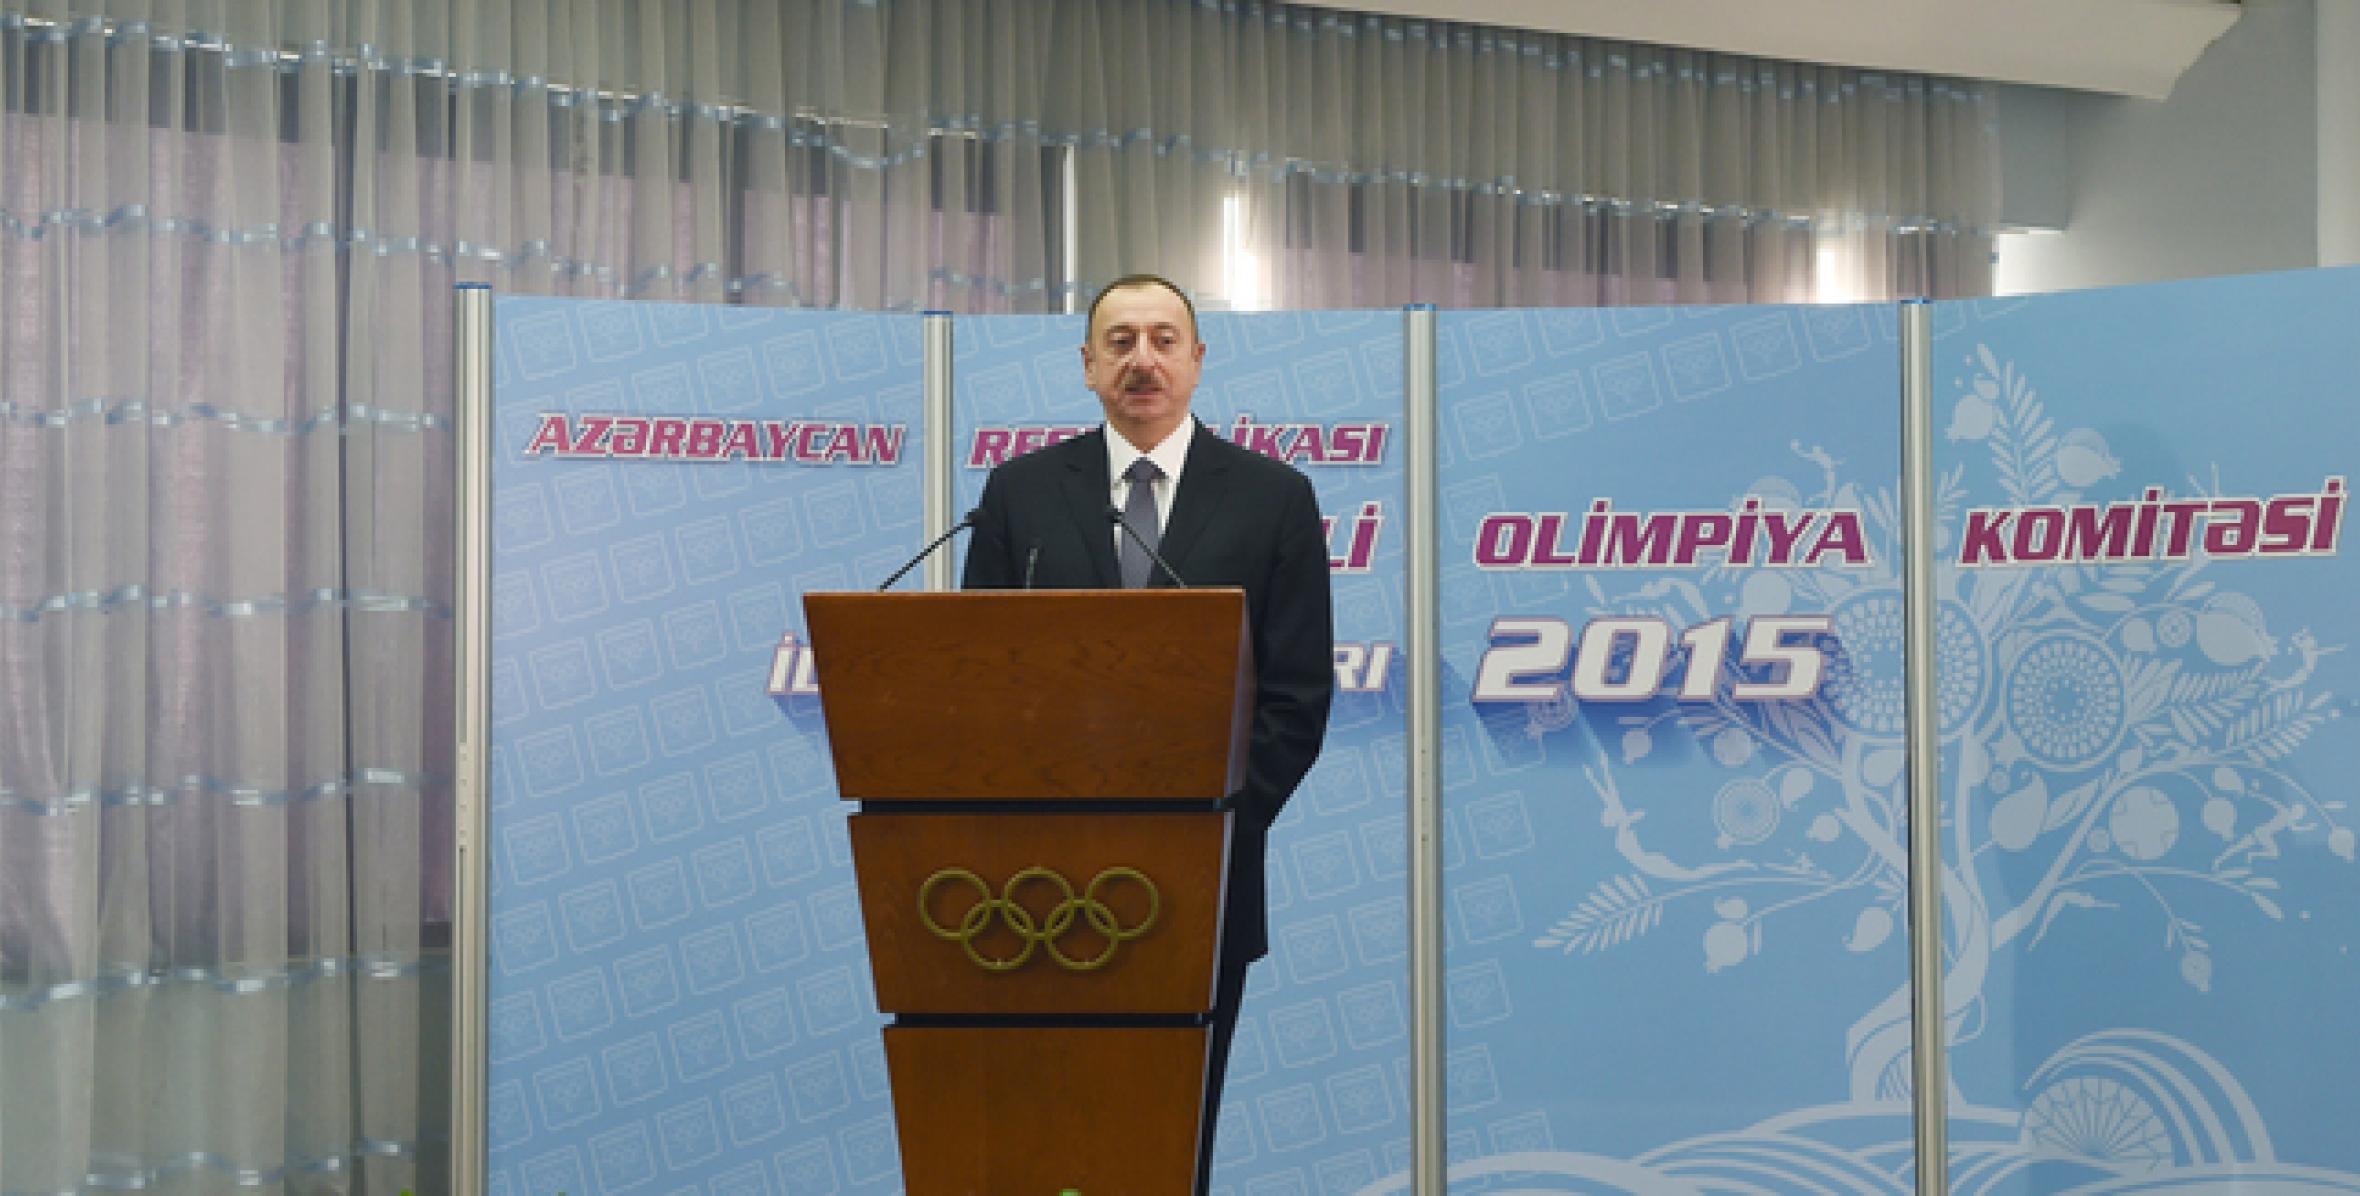 Speech by Ilham Aliyev at the ceremony dedicated to sport results of 2015